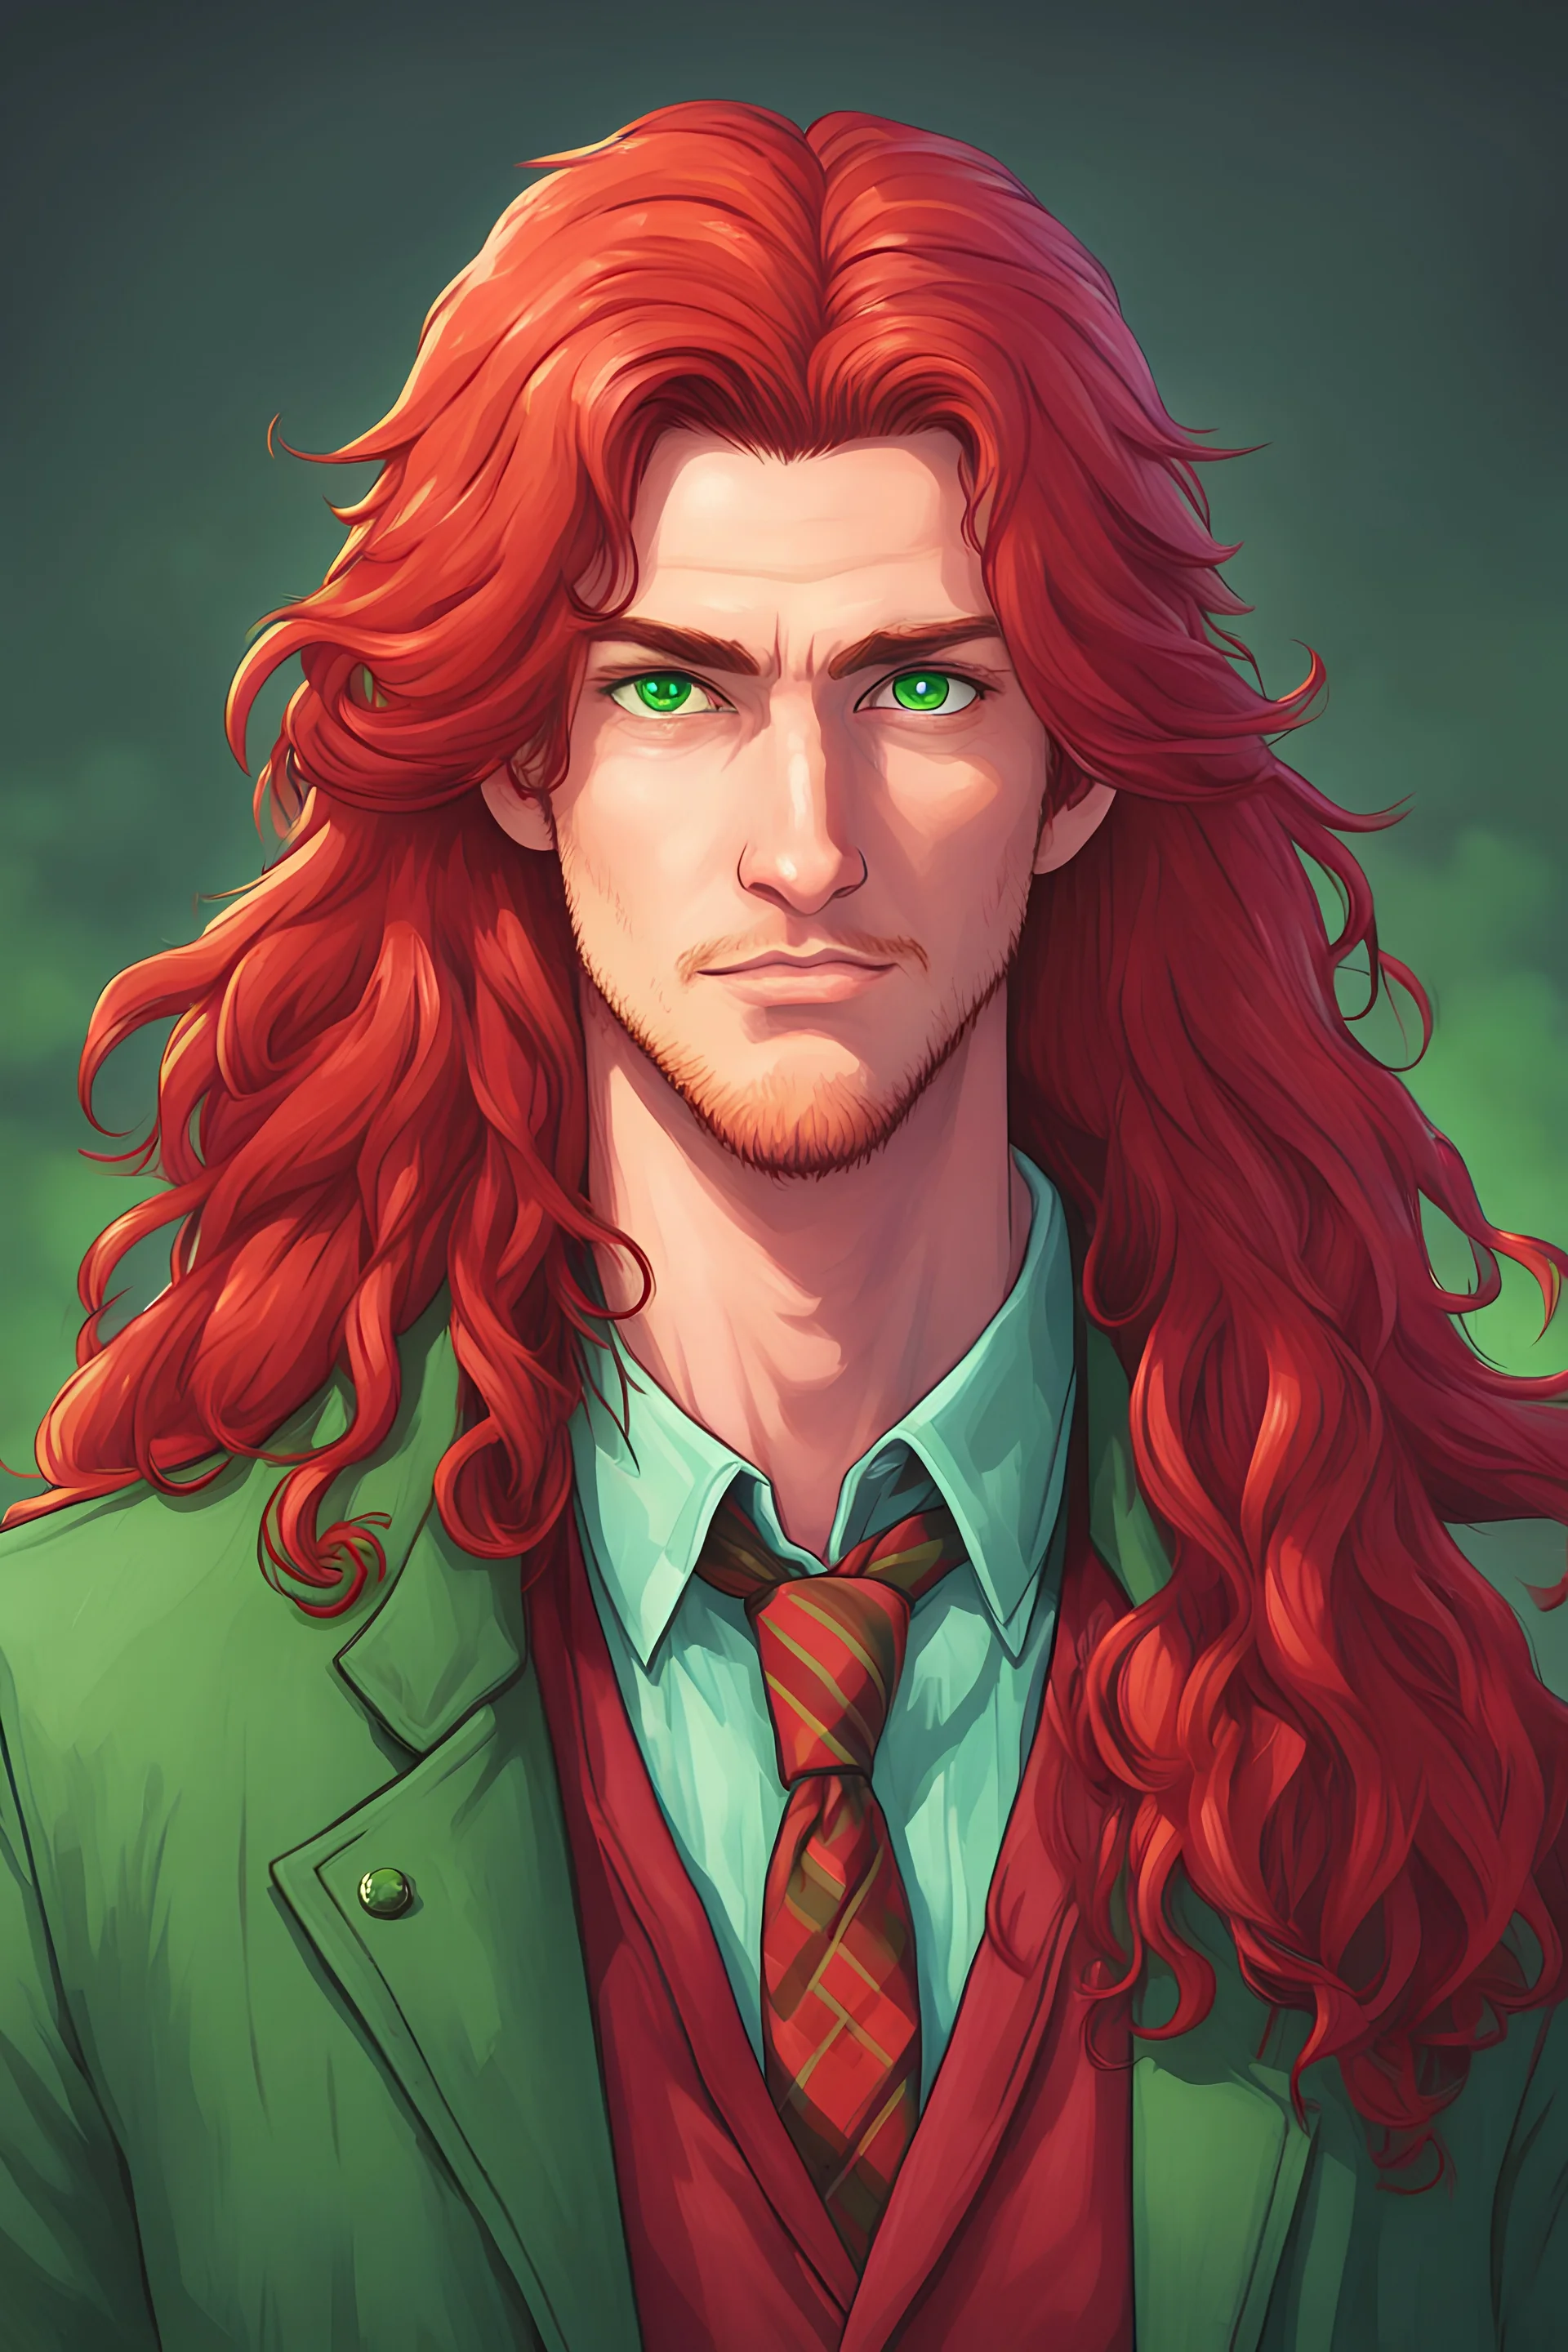 man, long red hair, long red jacket with green tie, green eyes, stardew valley style